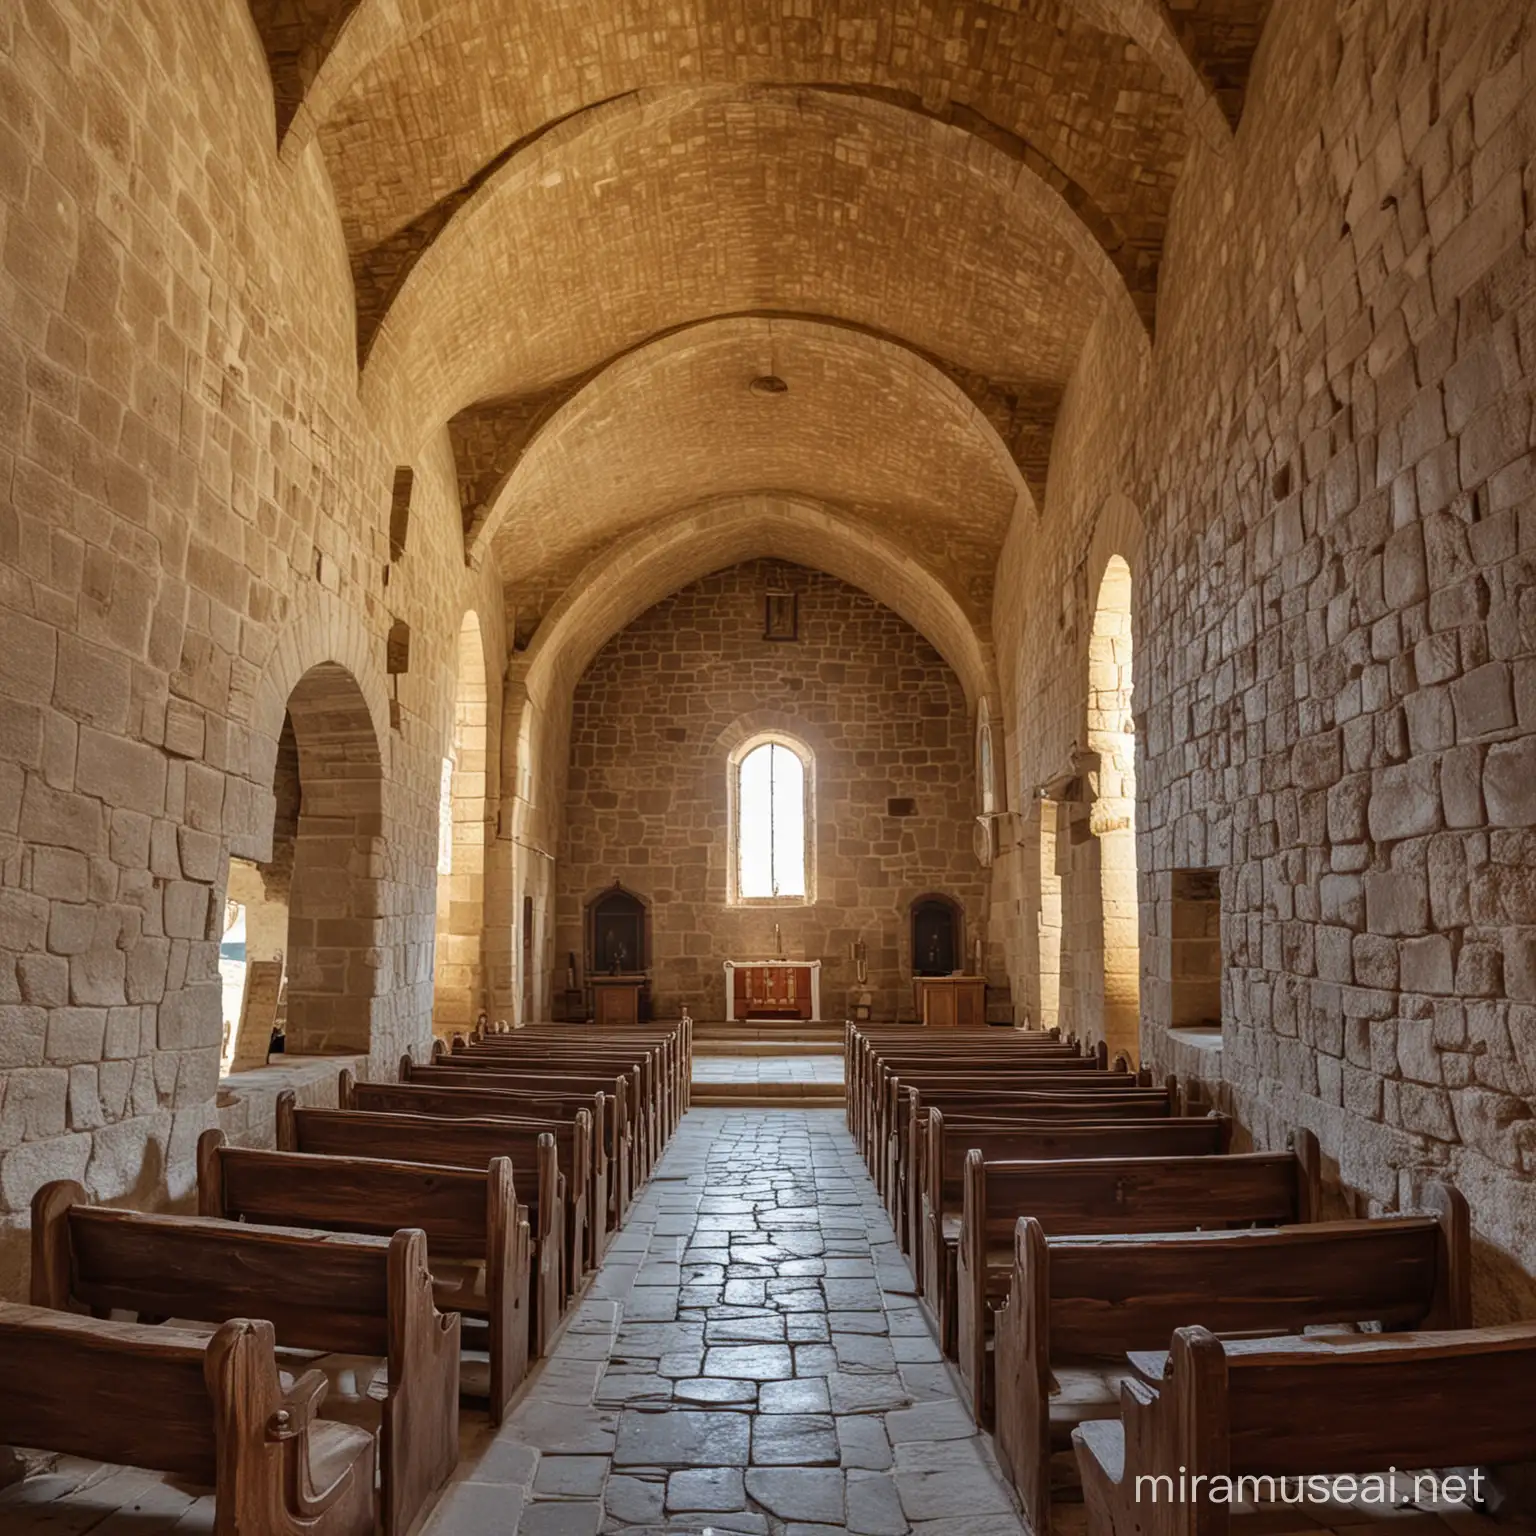 Interior of an Ancient Church with Decorative Features